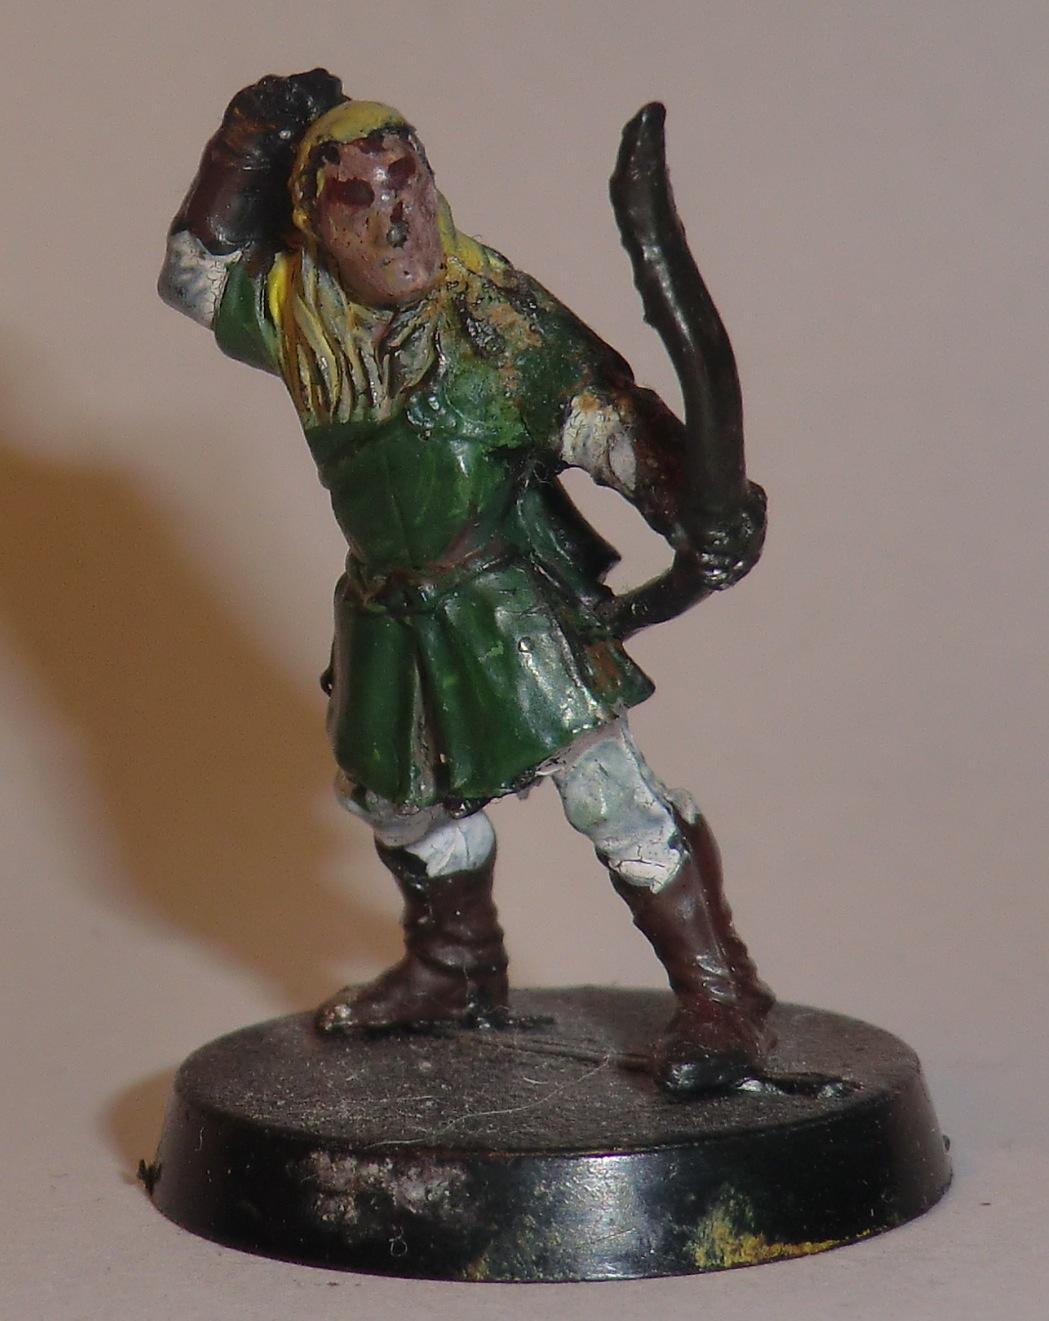 My First Ever Painted Minature